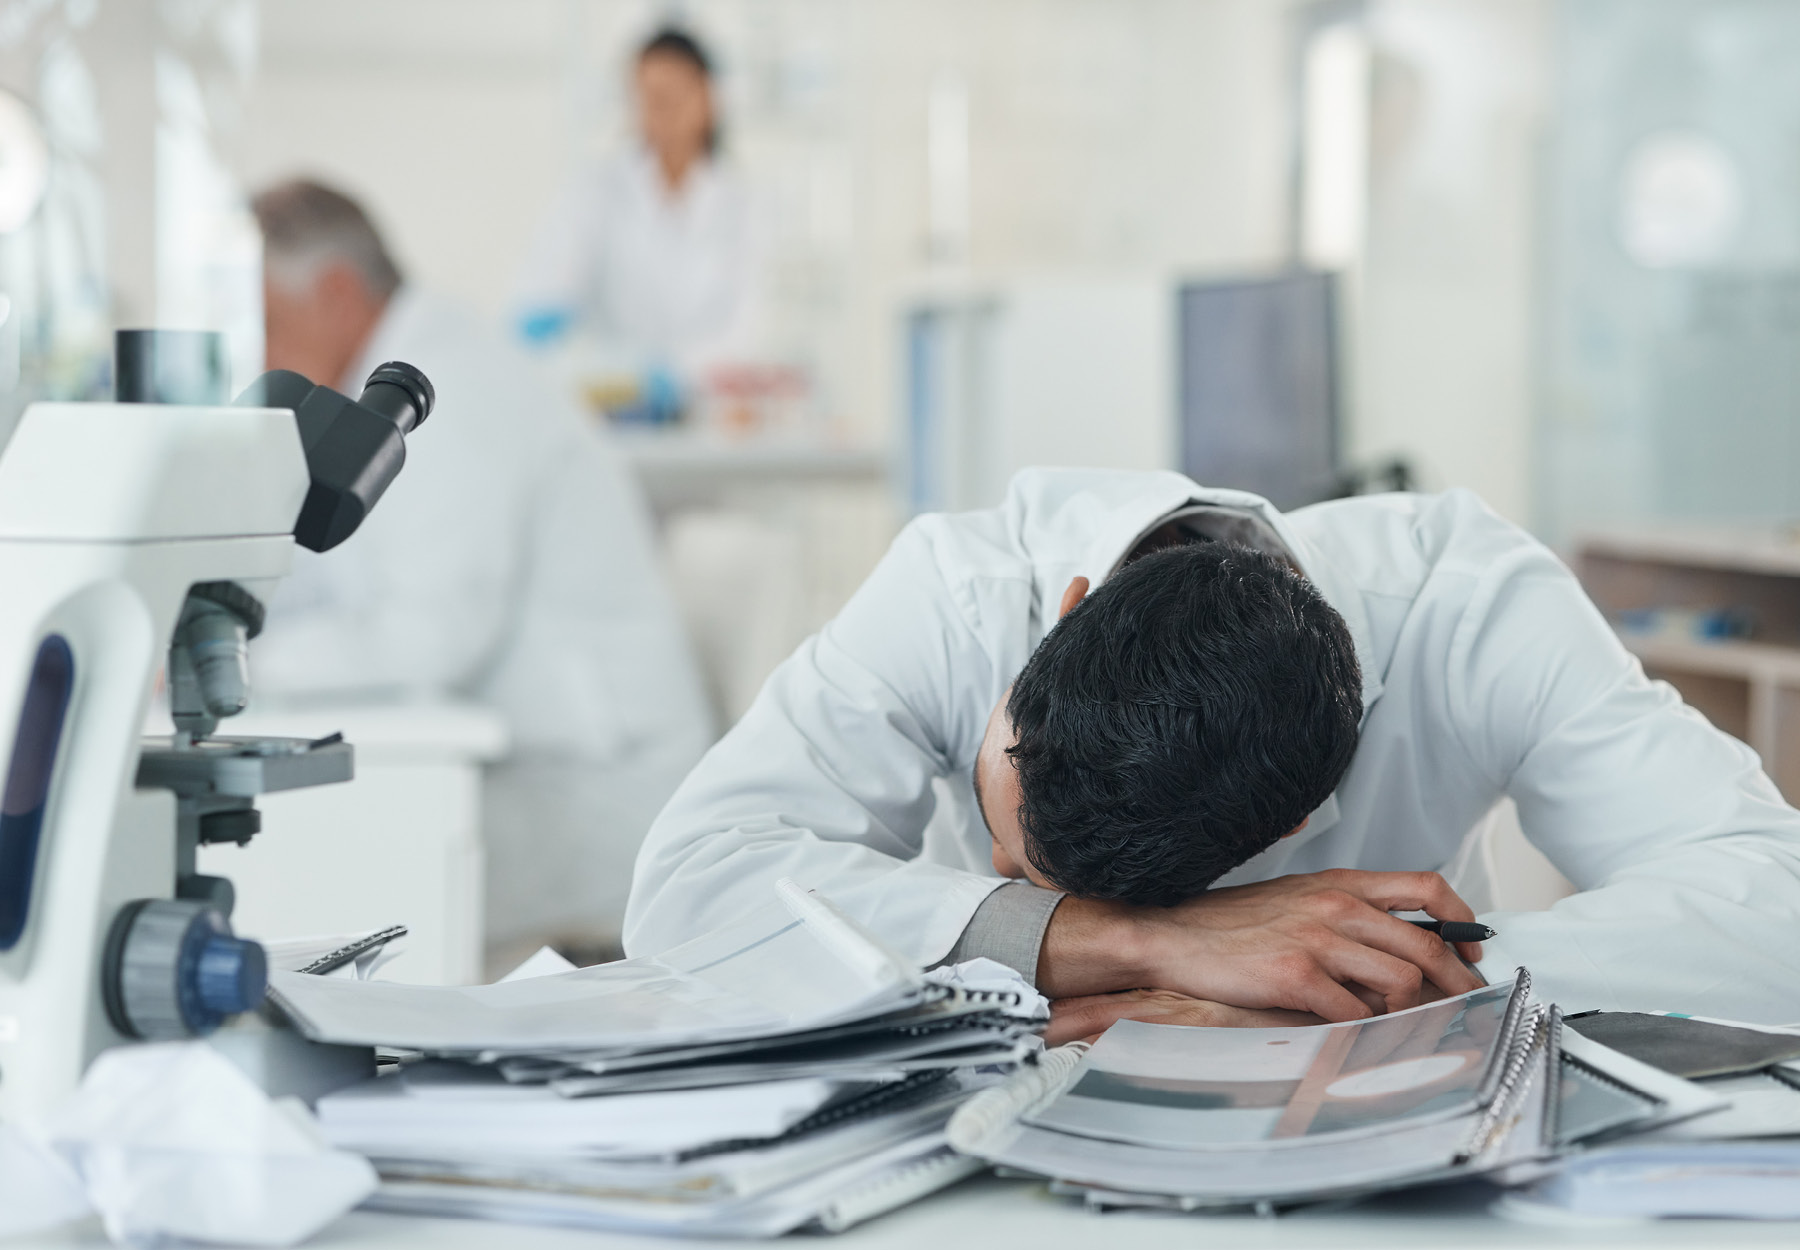 A stressed lab worker rests his head on a stack of papers on the lab bench. iStock image.